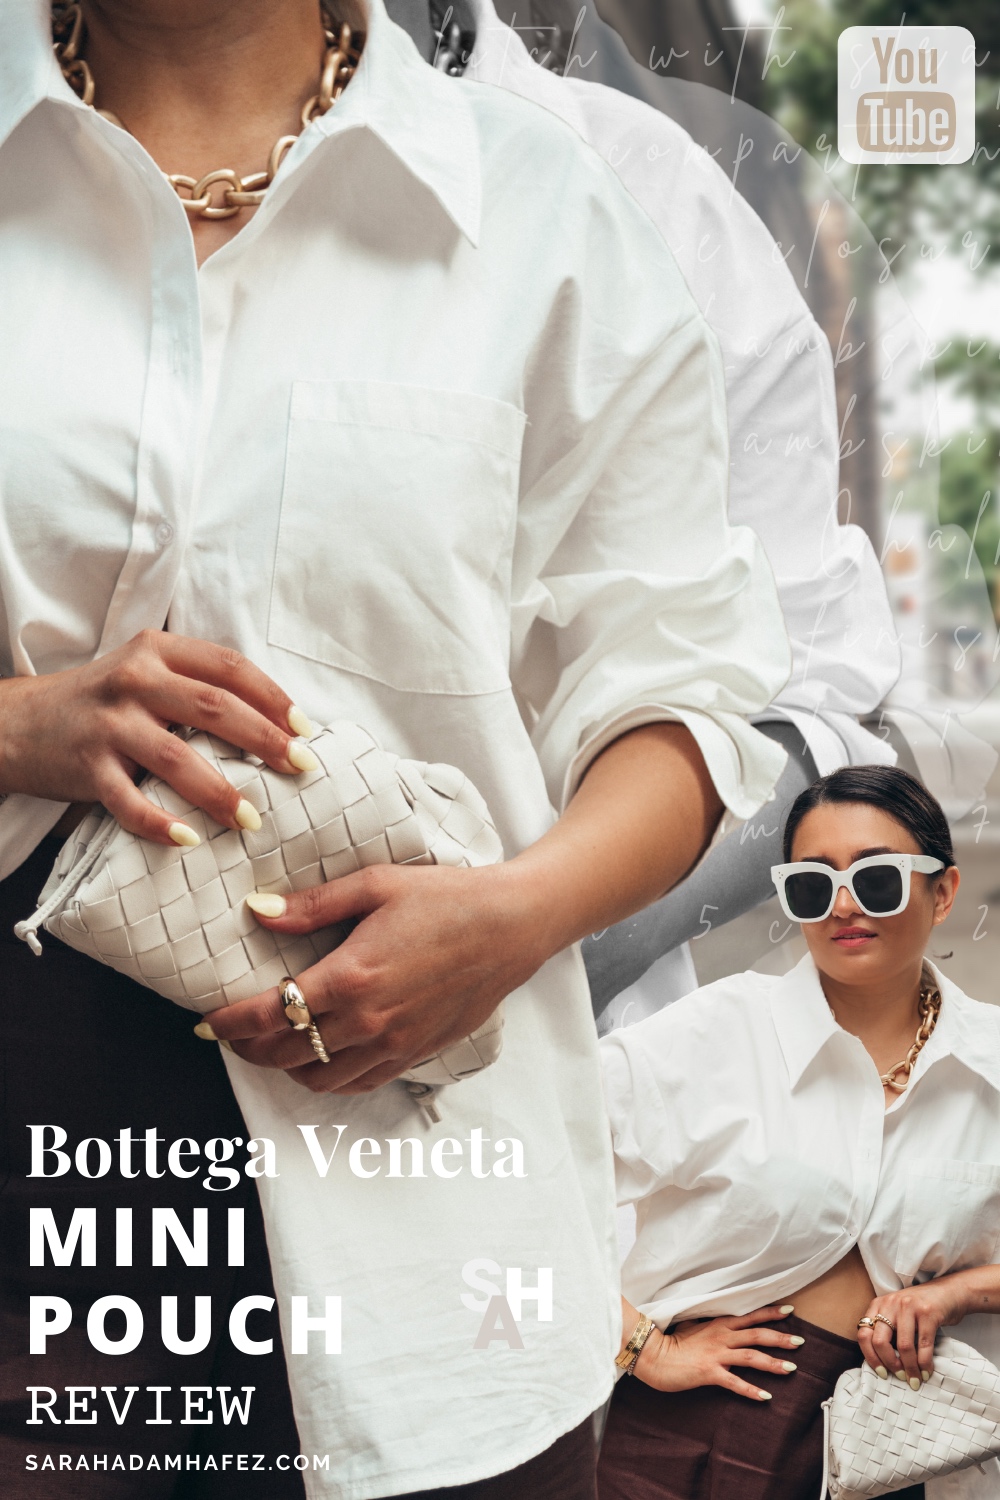 Bottega mini pouch or small loop? Pros and cons in comments… : r/handbags